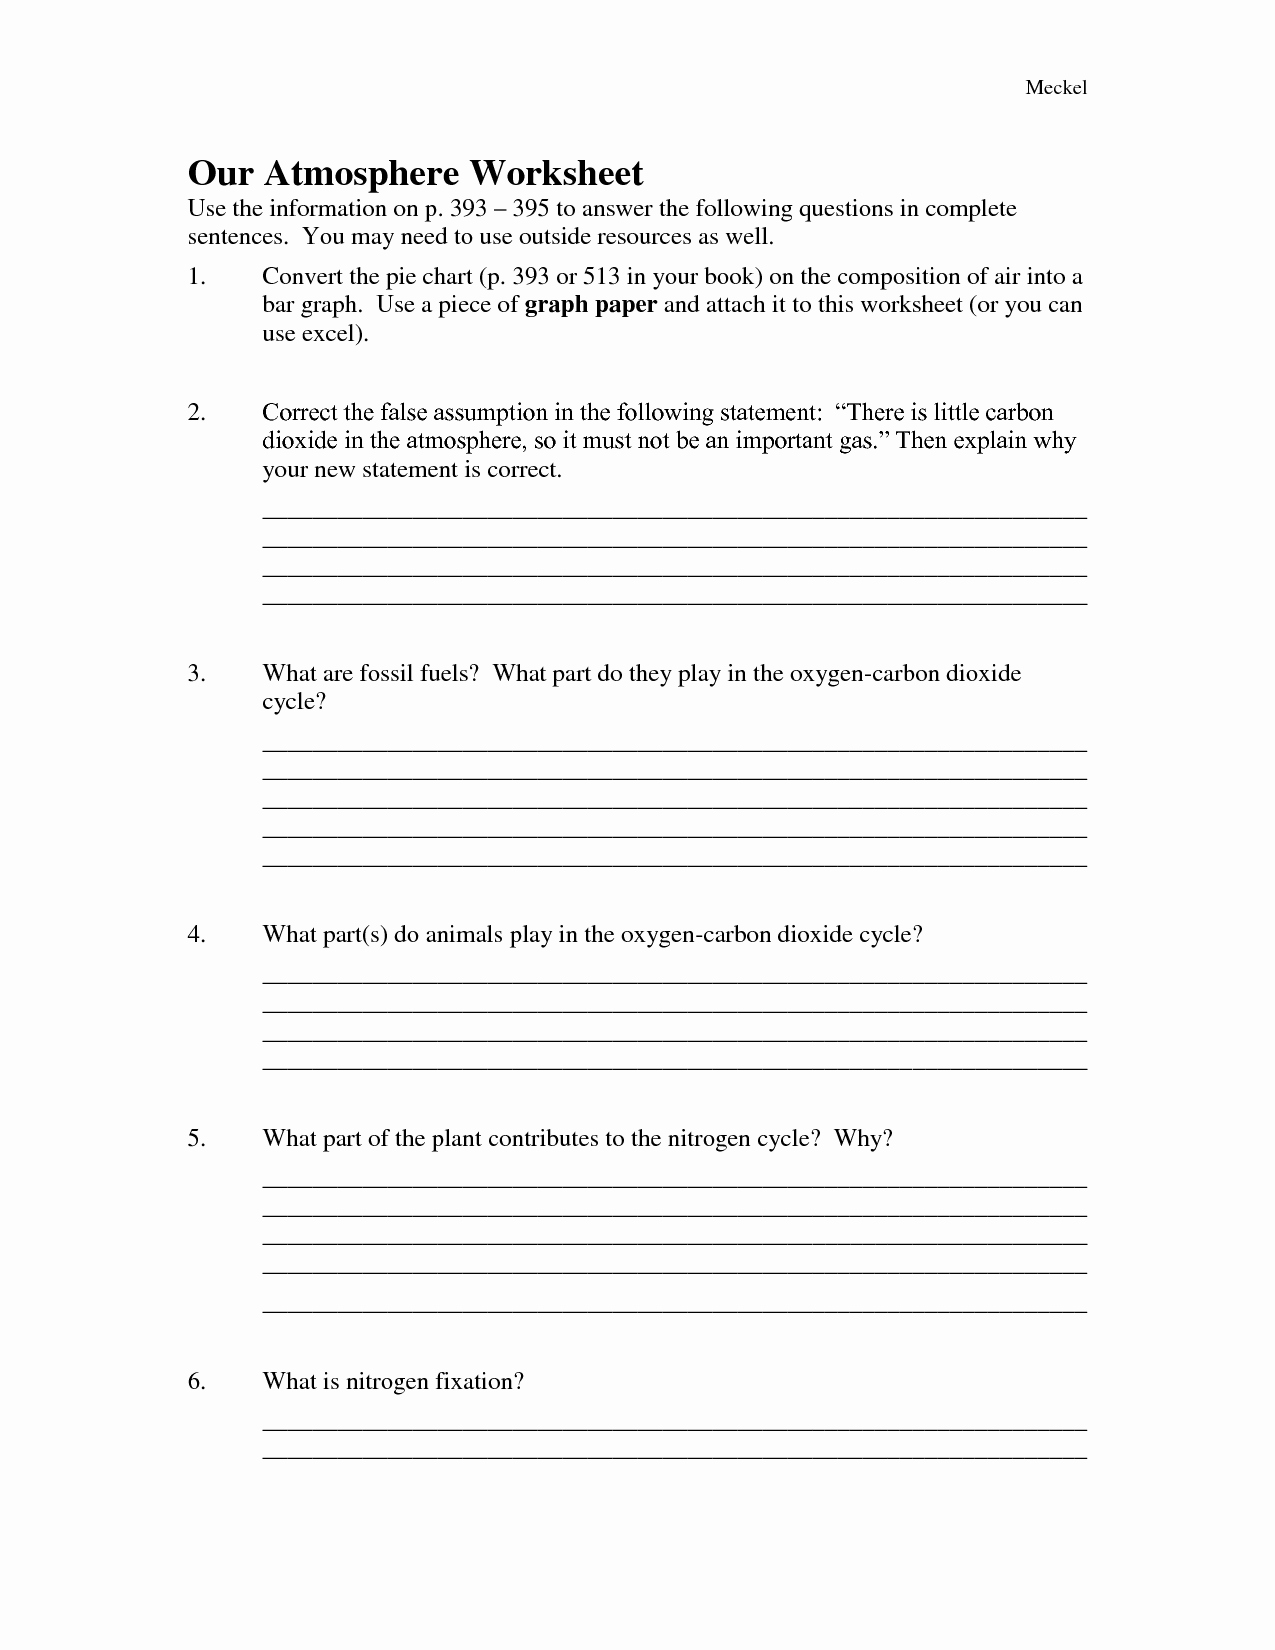 Layers Of the atmosphere Worksheet New 7 Best Of Layers the atmosphere Worksheet